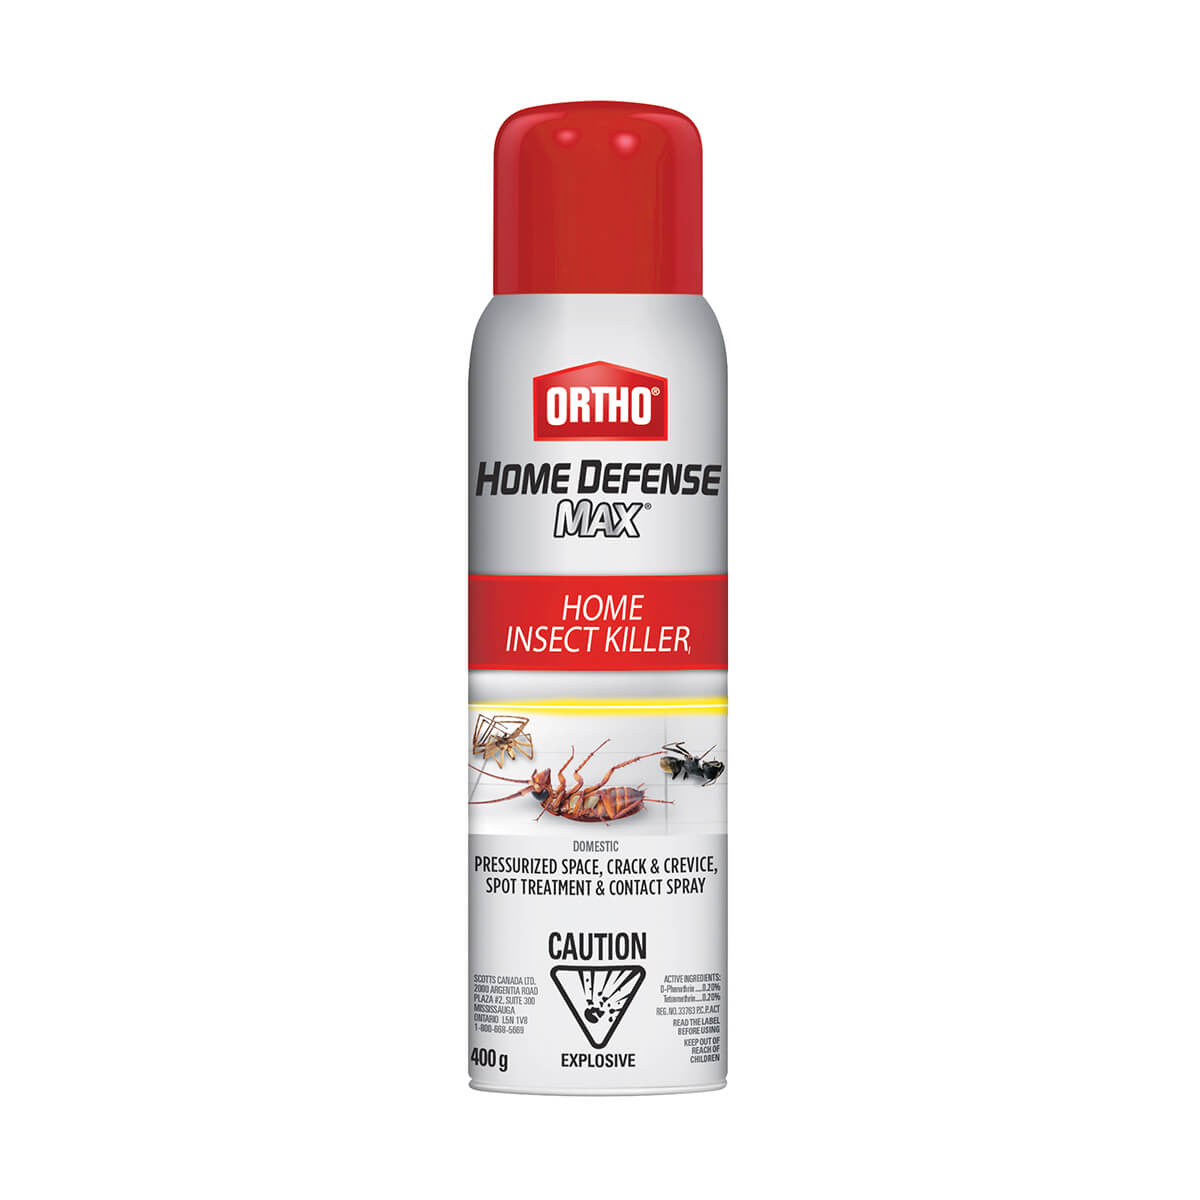 Ortho® Home Defense Max Home Insect Killer - 400 g